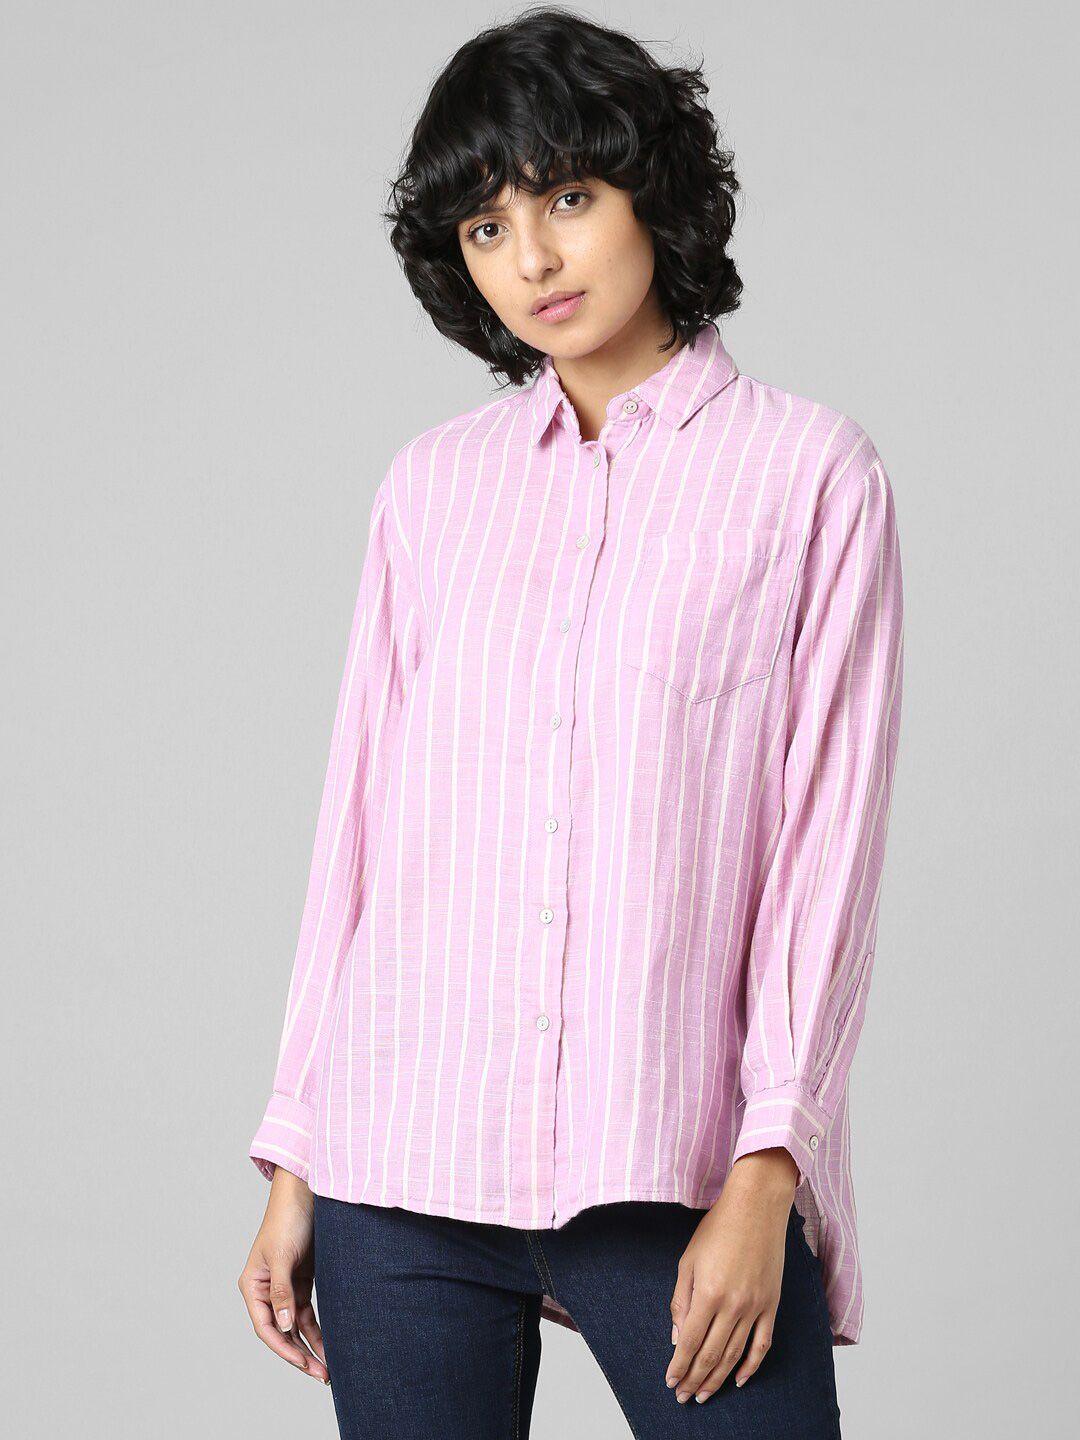 ONLY Women Pink & White Striped Cotton Casual Shirt